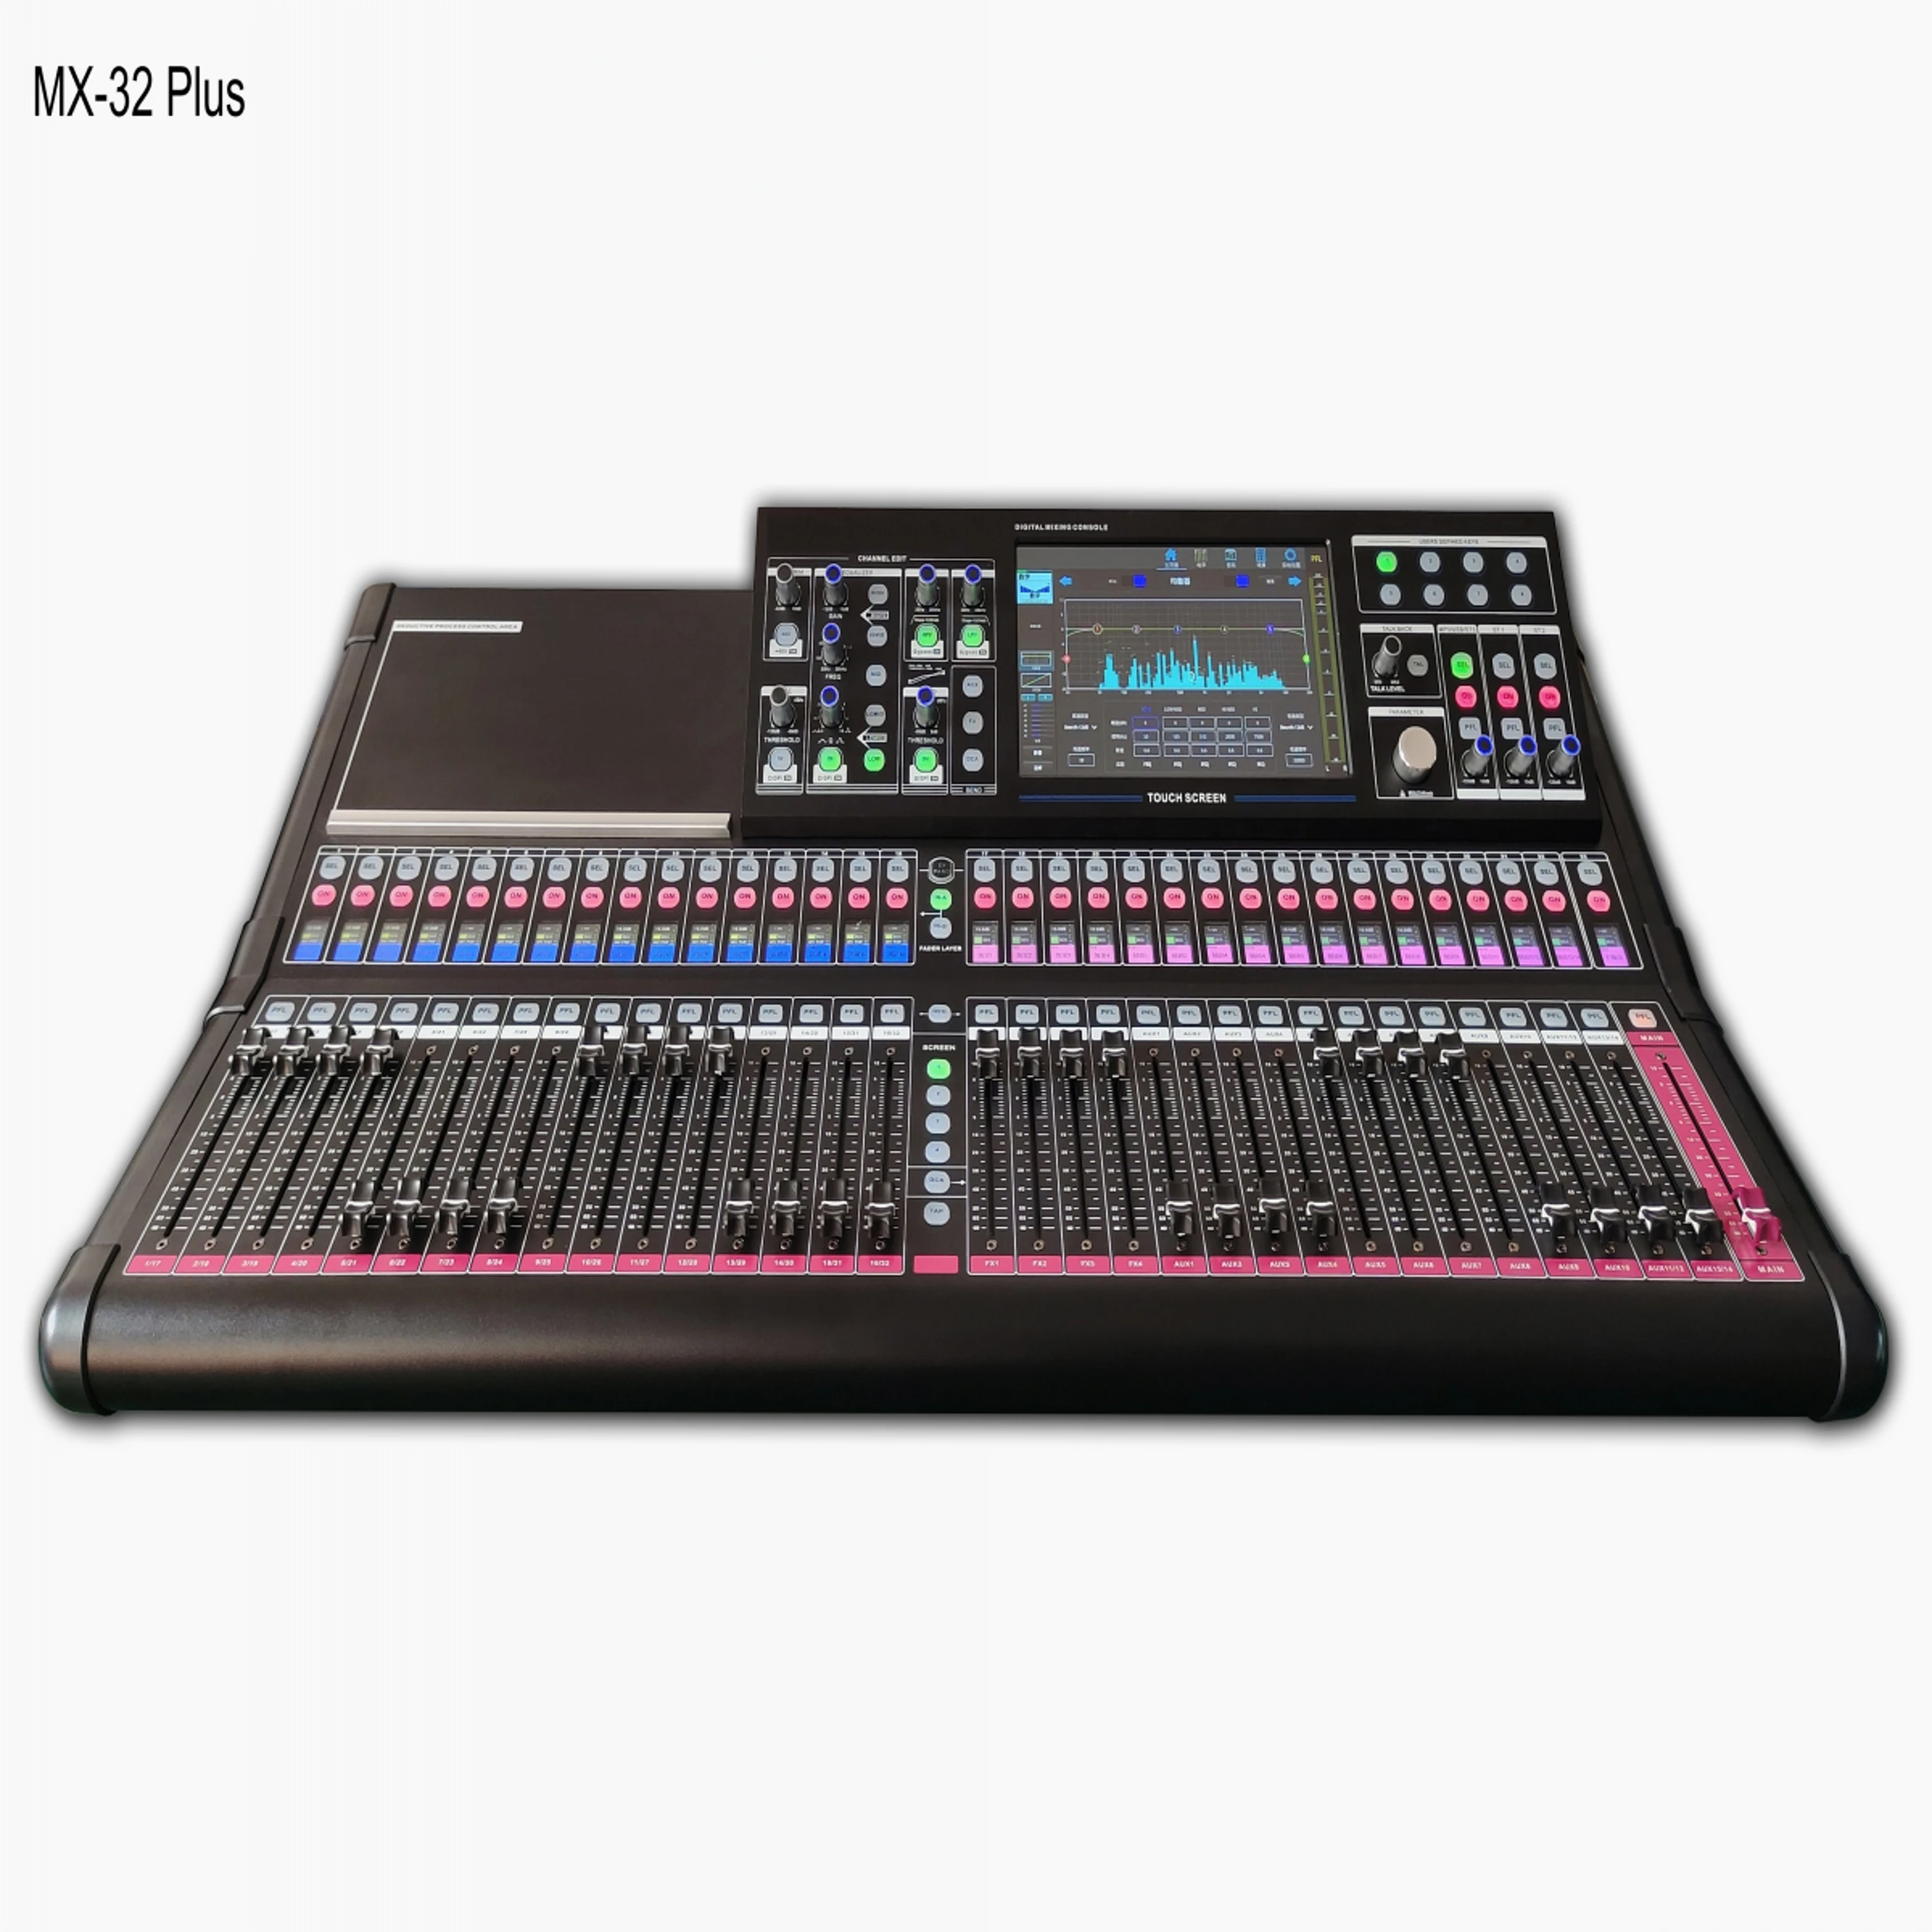 MX-32 PLUS 32Channels professional Audio DJ sound Multi-track Dante Recording system touch mixer GIG mixing desk console From m.alibaba.com